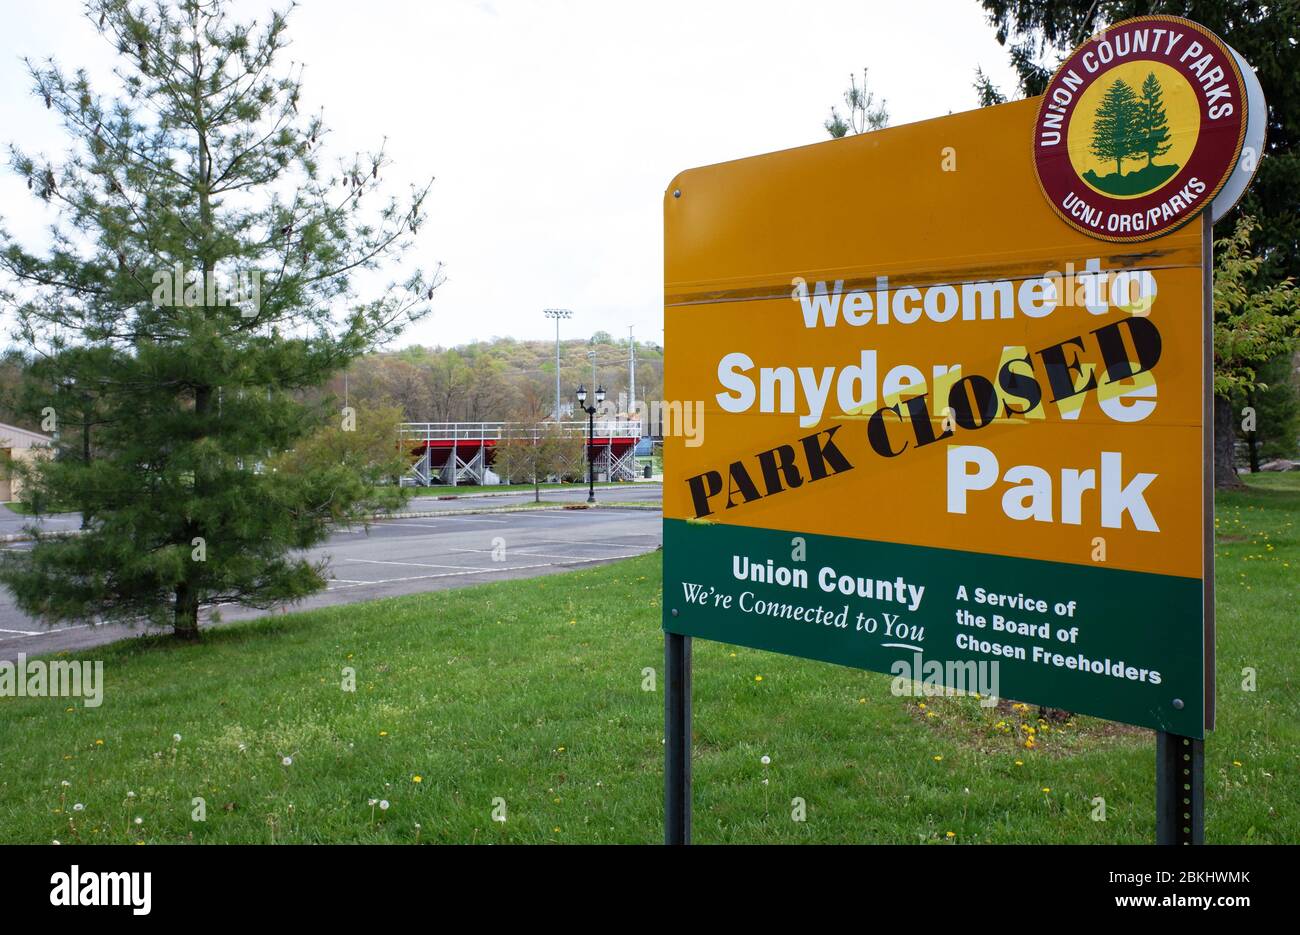 'Park closed' warning sign place over the sign board of Snyder Ave Park during covid-19 coronavirus pandemic outbreak.Berkeley Heights.New Jersey.USA Stock Photo